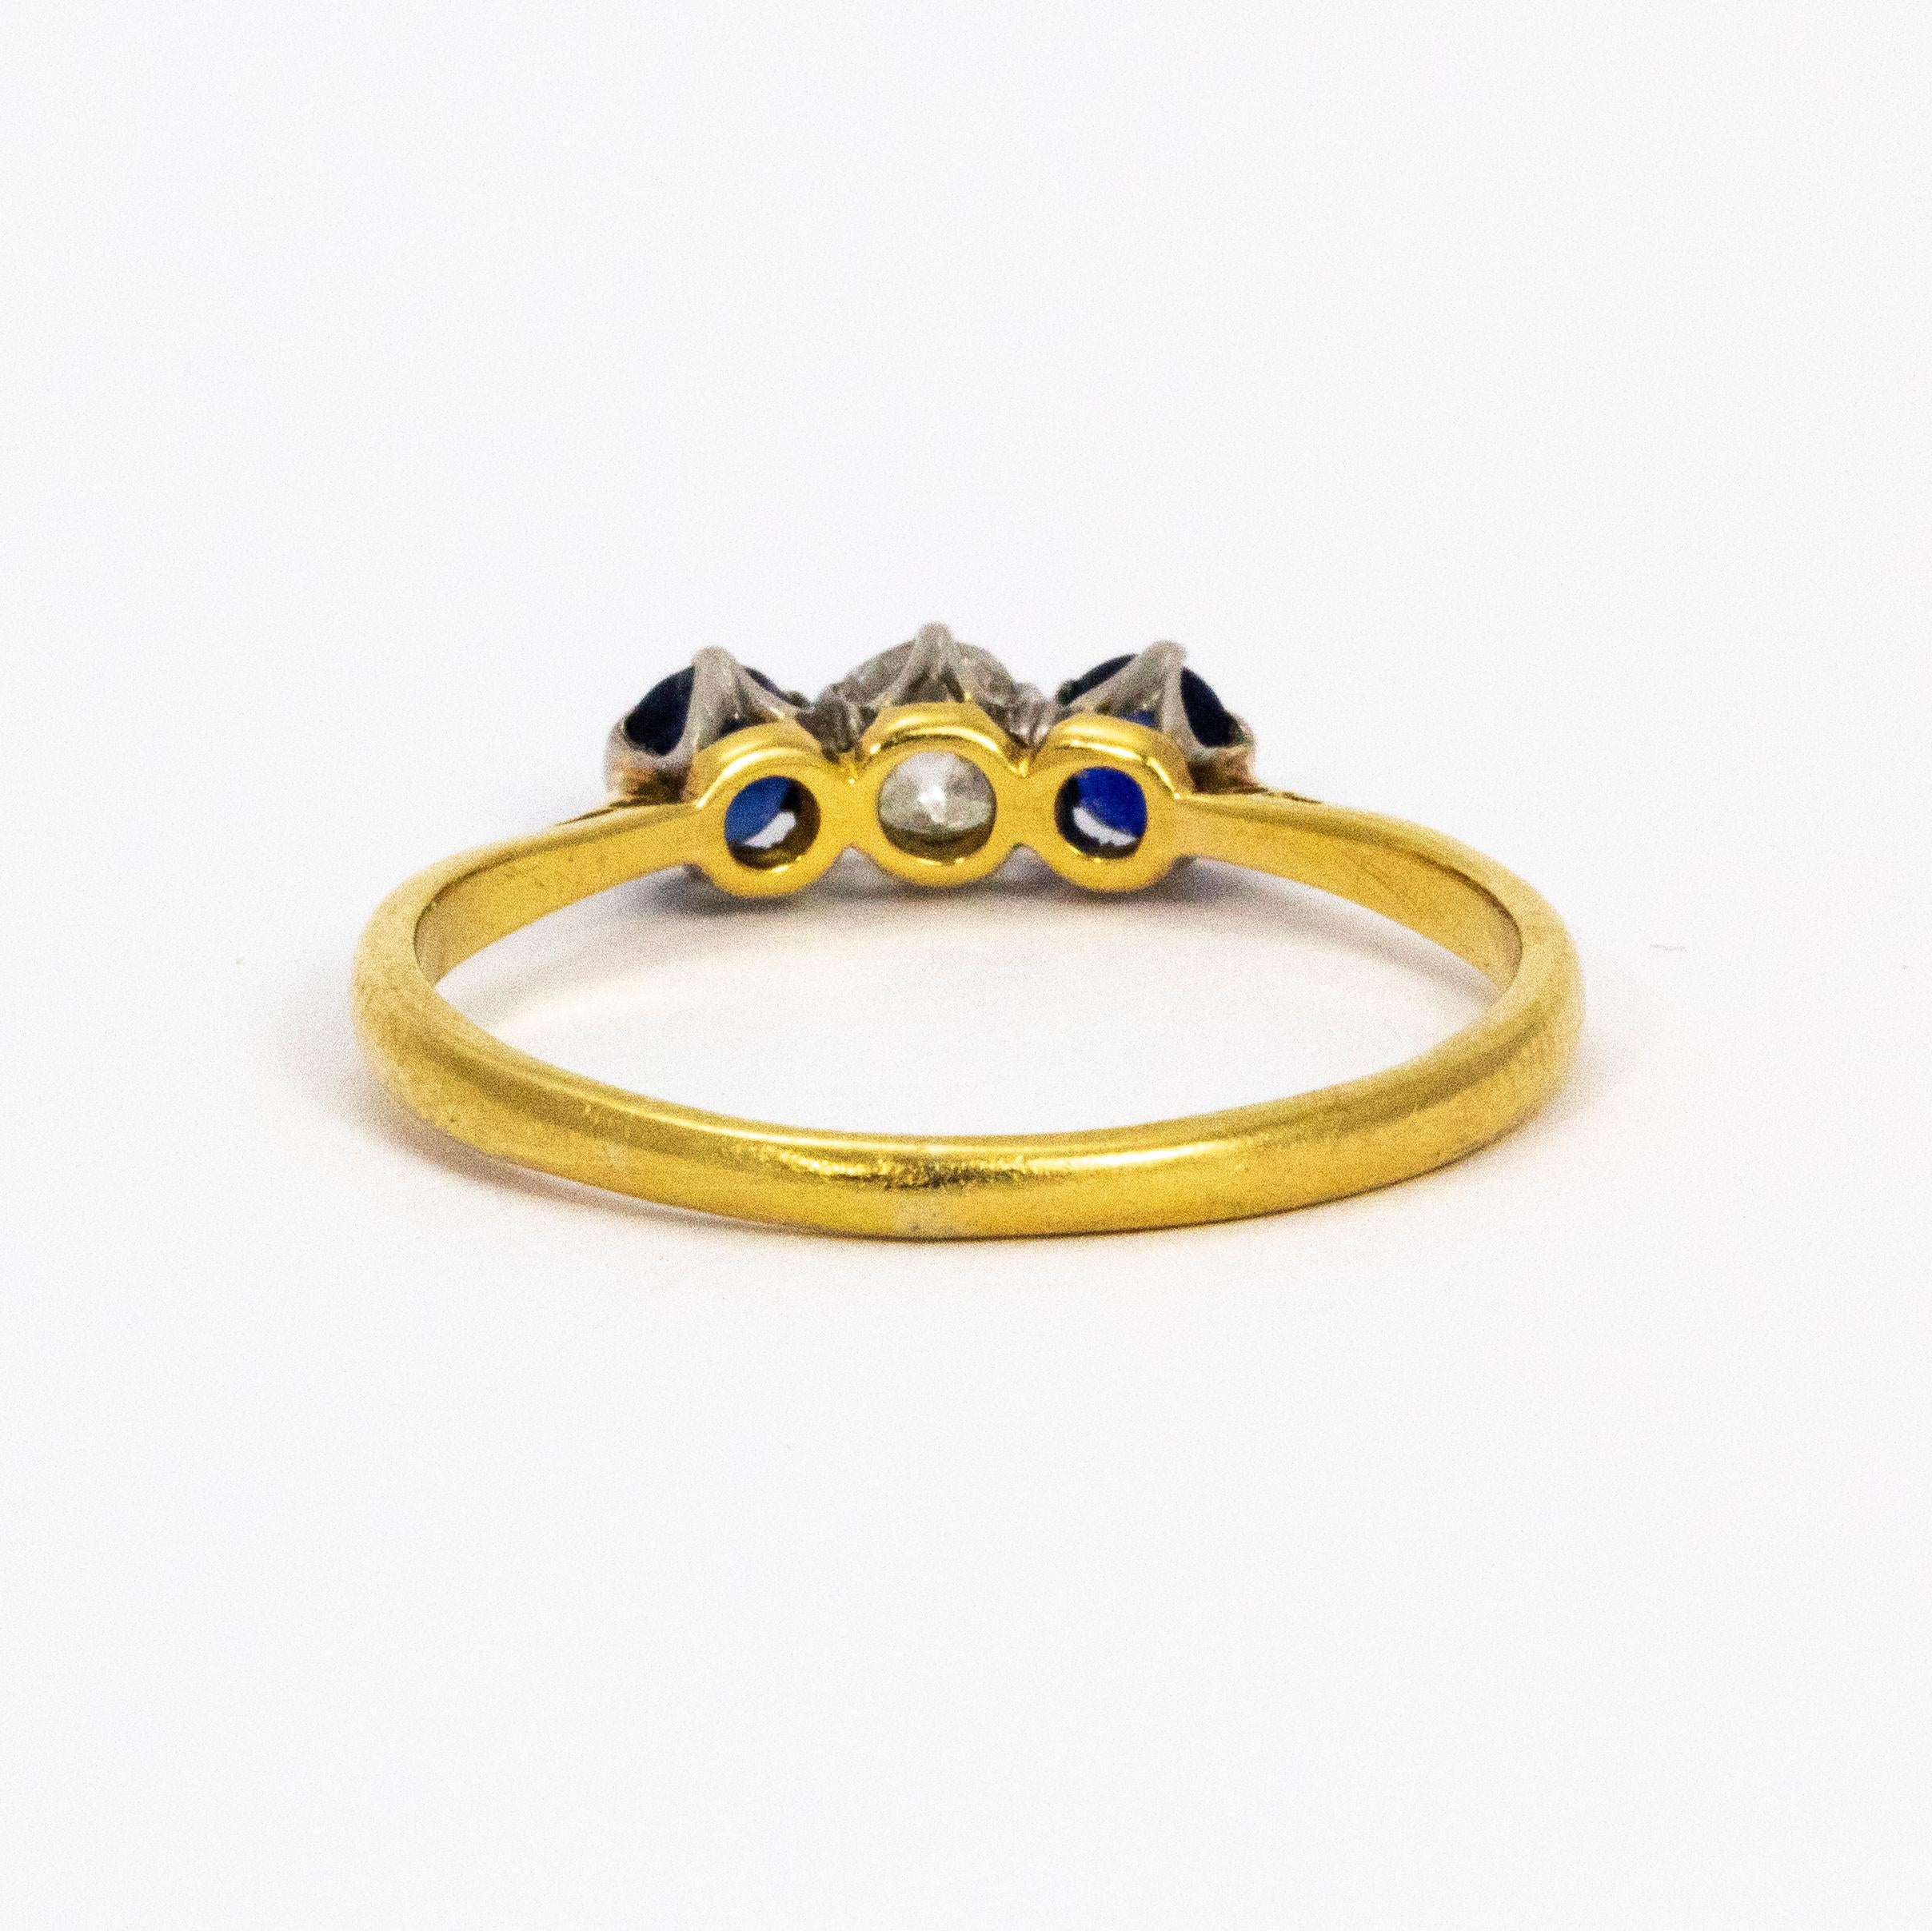 Edwardian Sapphire and Diamond Ring 18 Carat Gold In Good Condition For Sale In Chipping Campden, GB